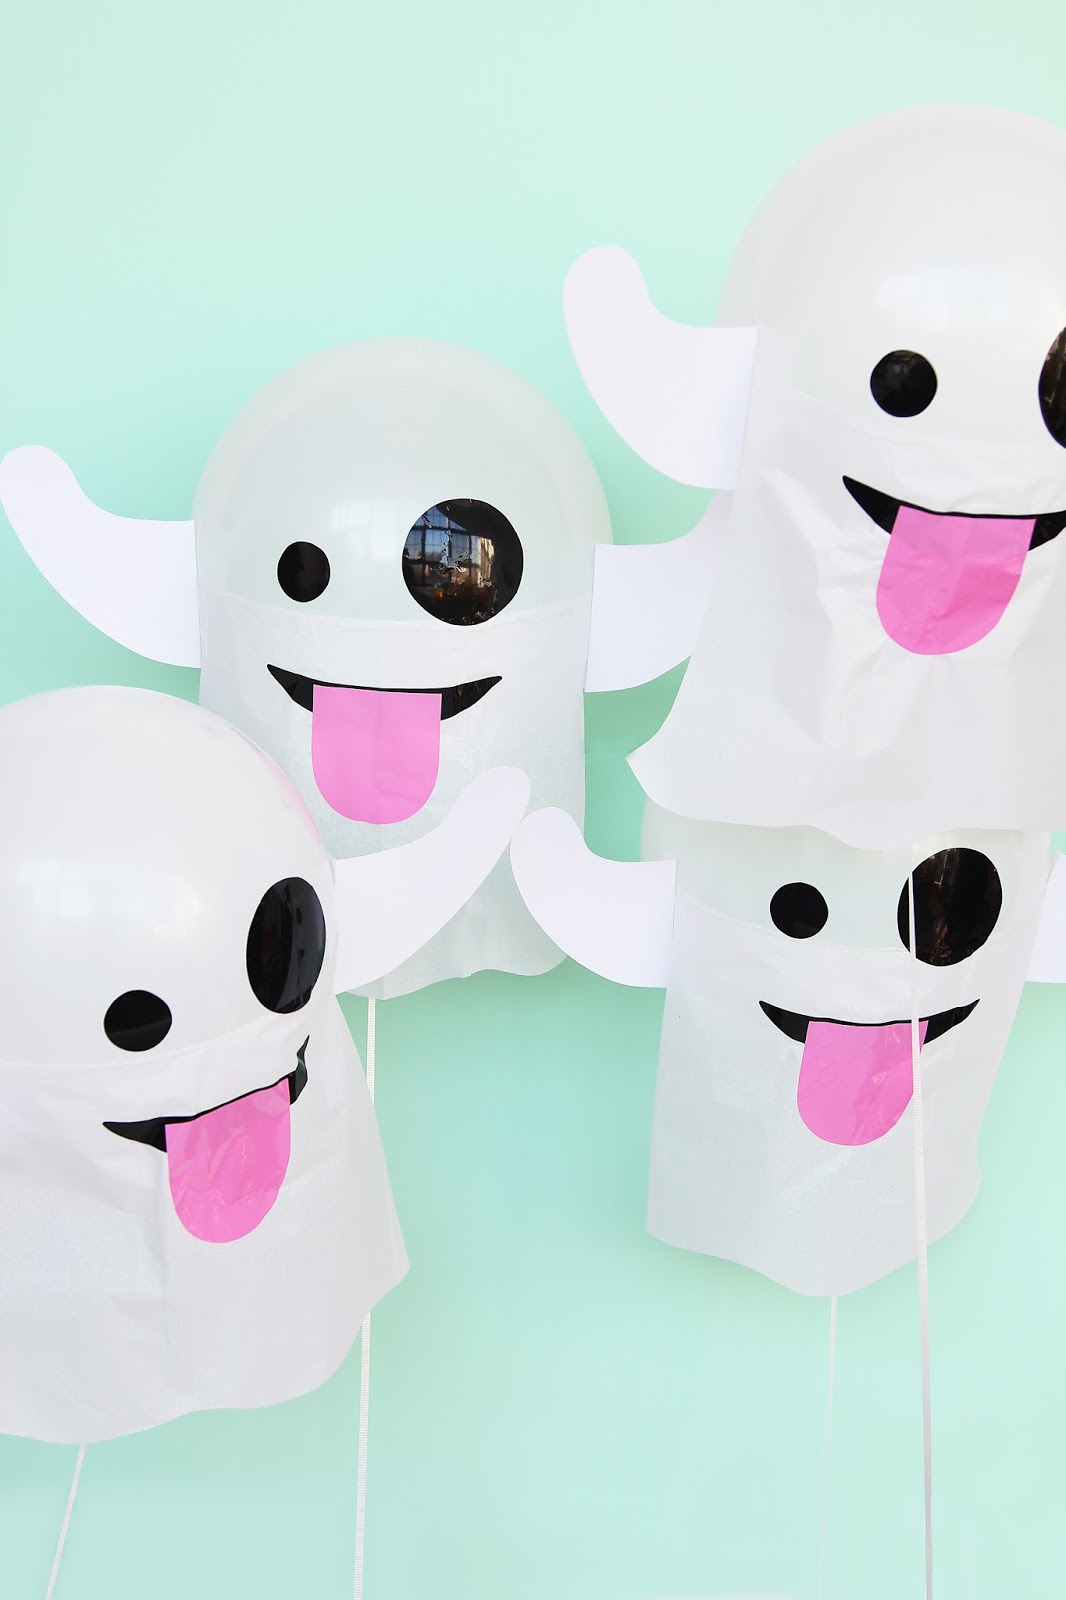 Halloween Decorations You Can Make With Balloons